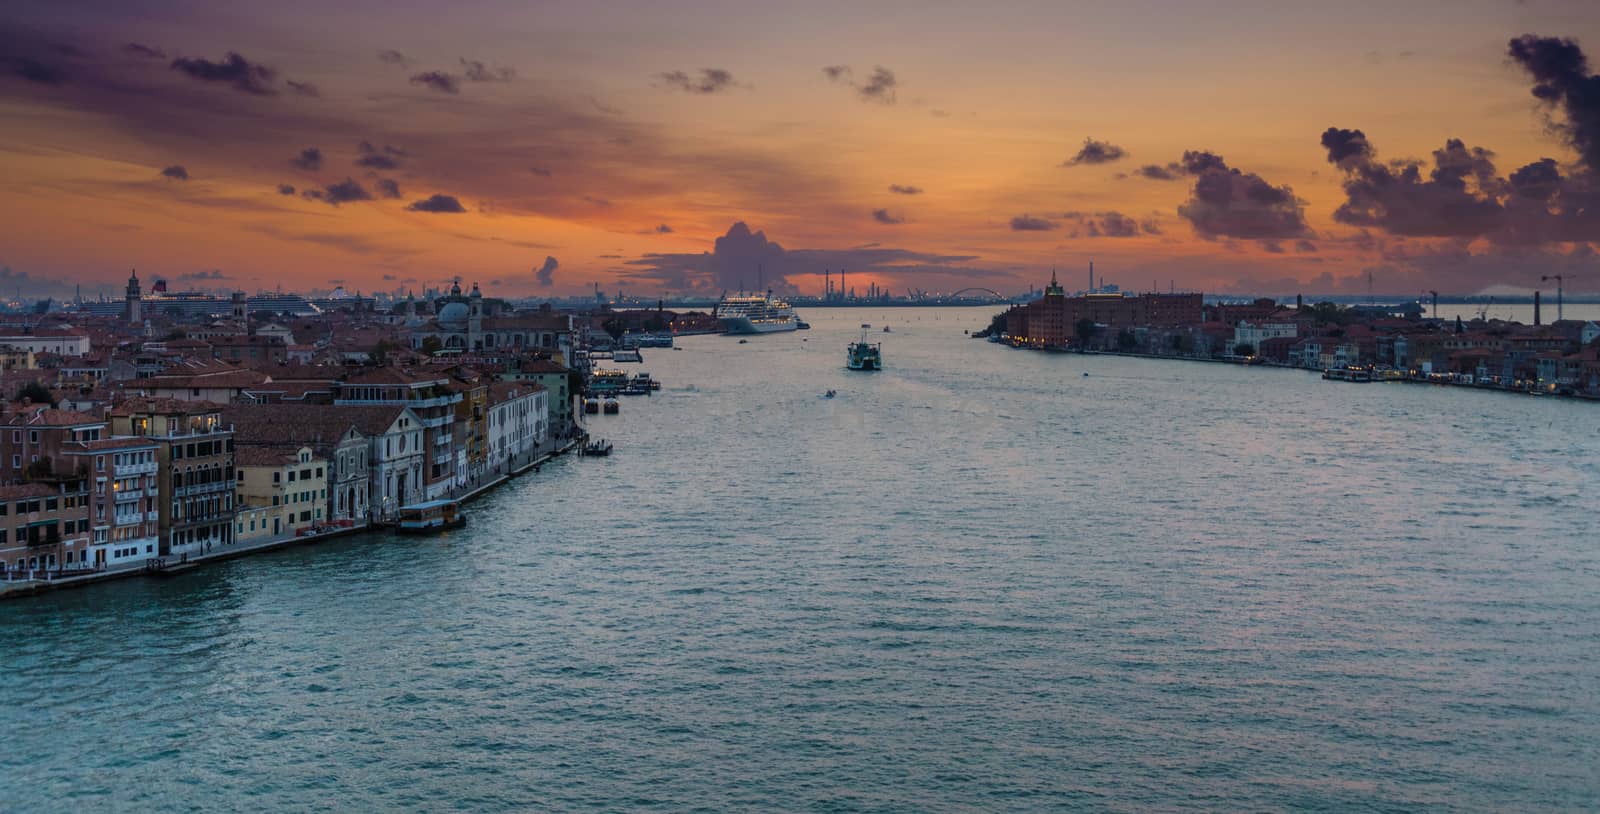 Orange Sunset Over Venice Canals by dbvirago